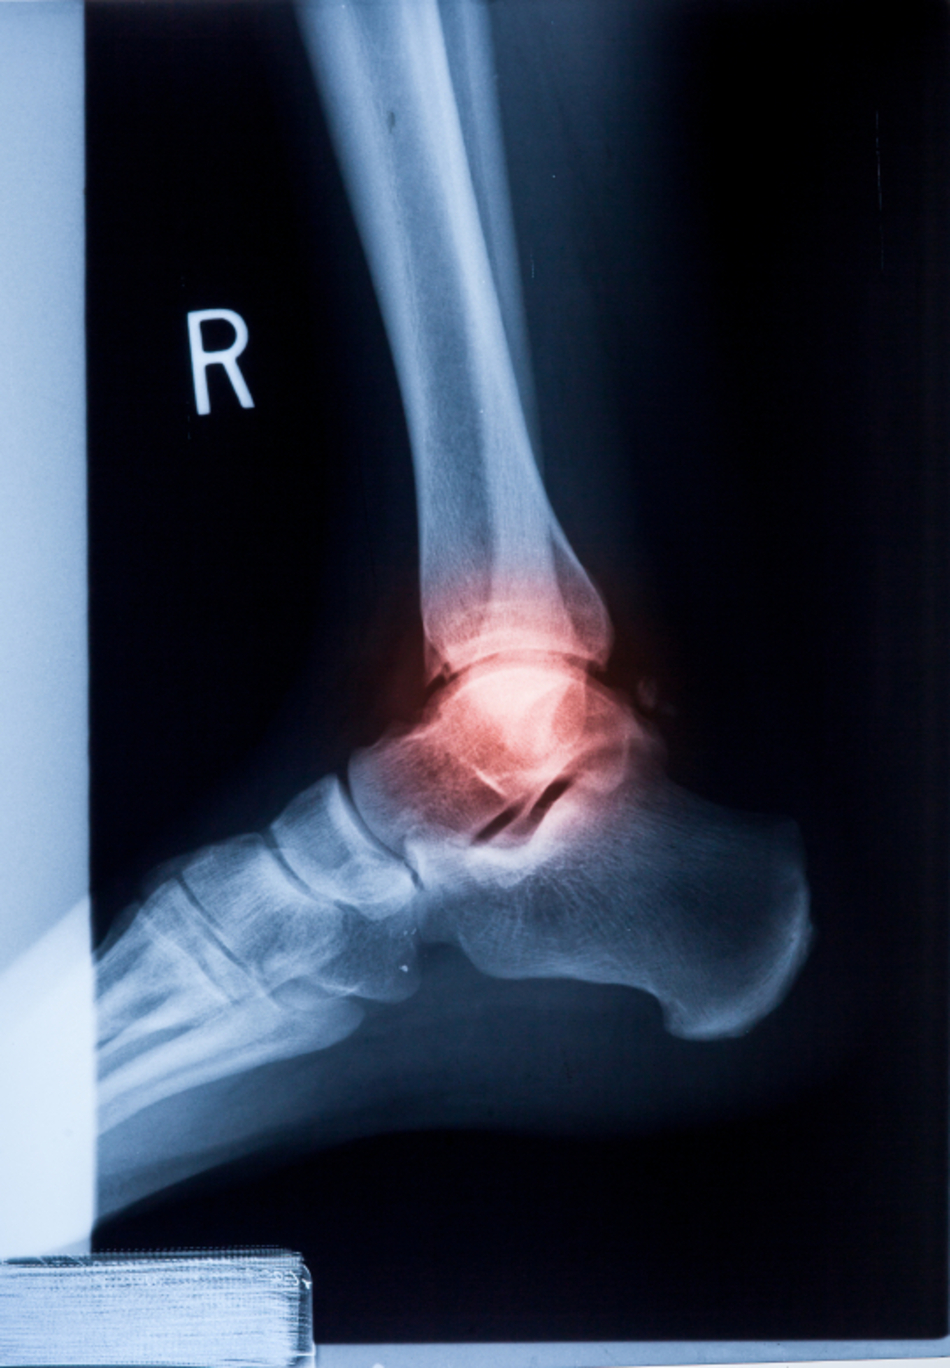 My Ankle is Sprained—But is it Fractured, Too?